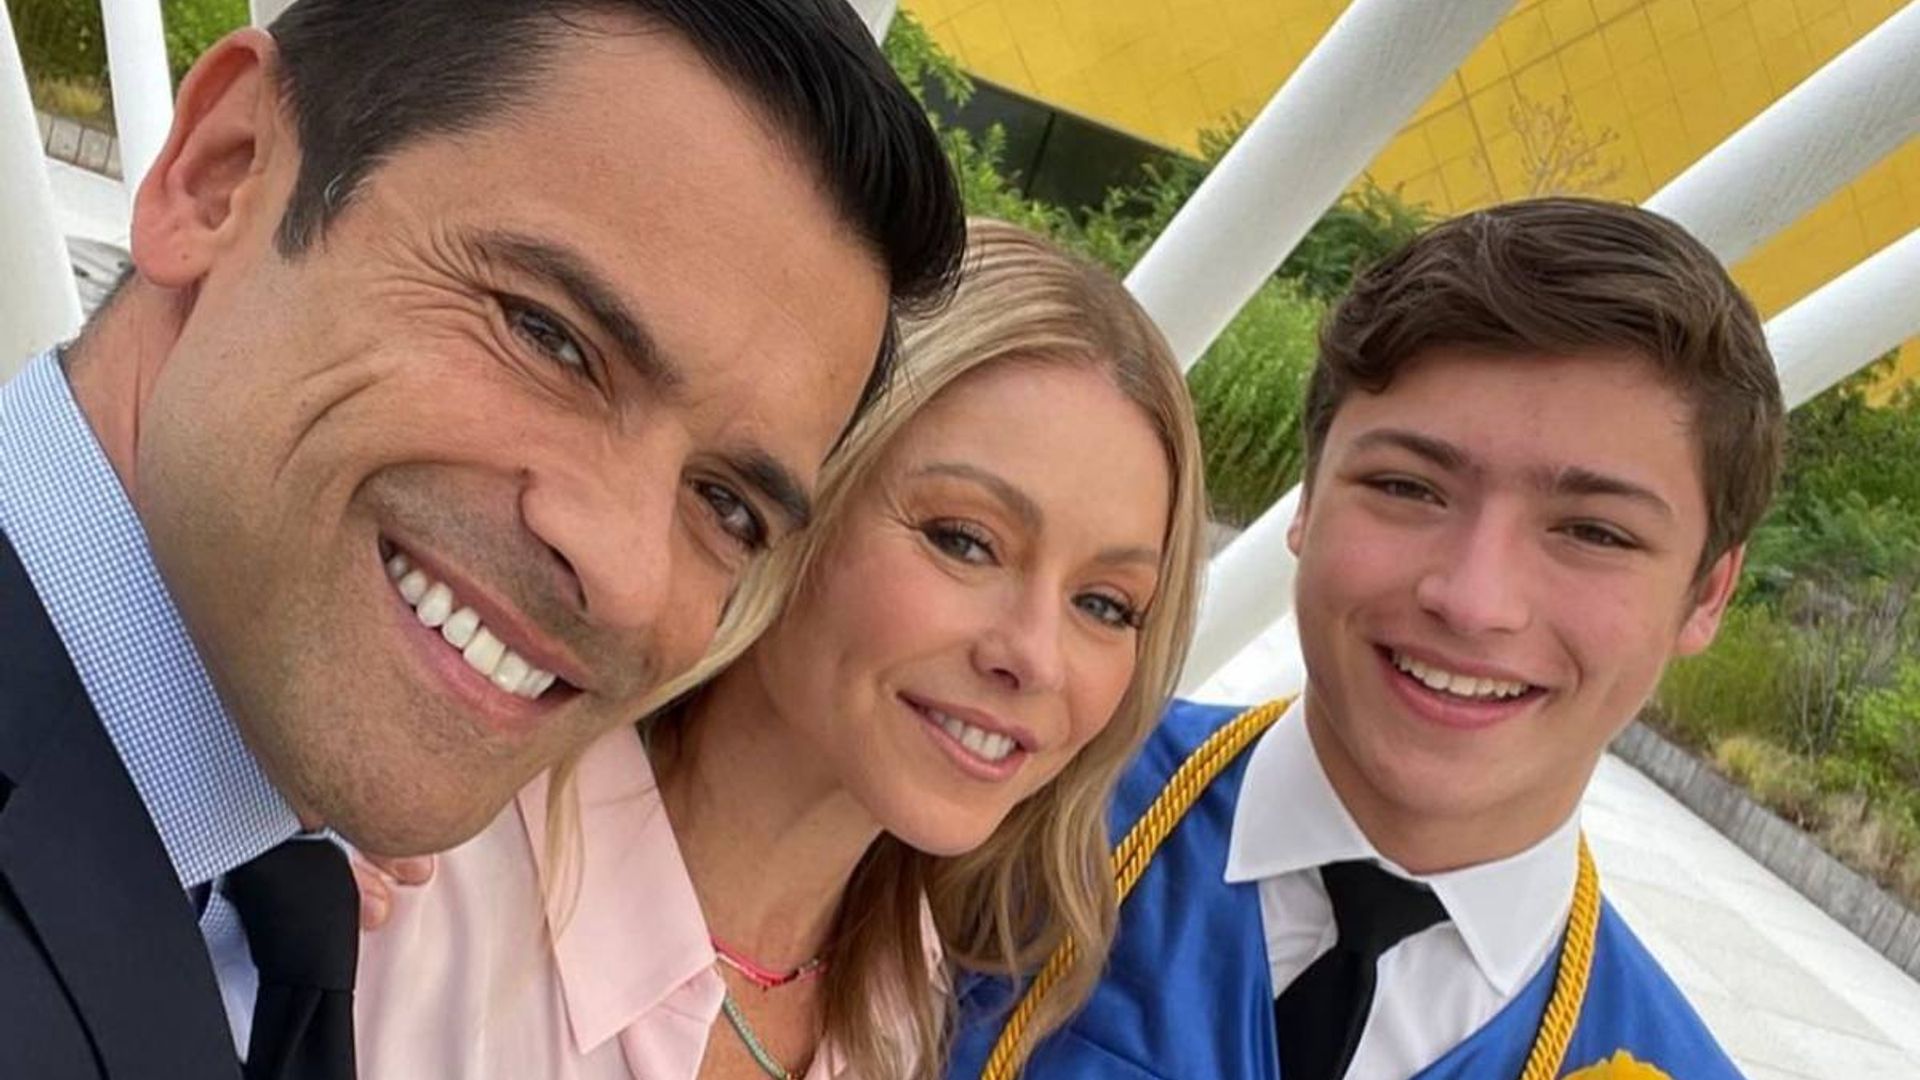 Joaquin Consuelos takes on huge sporting challenge at college as famous dad watches on